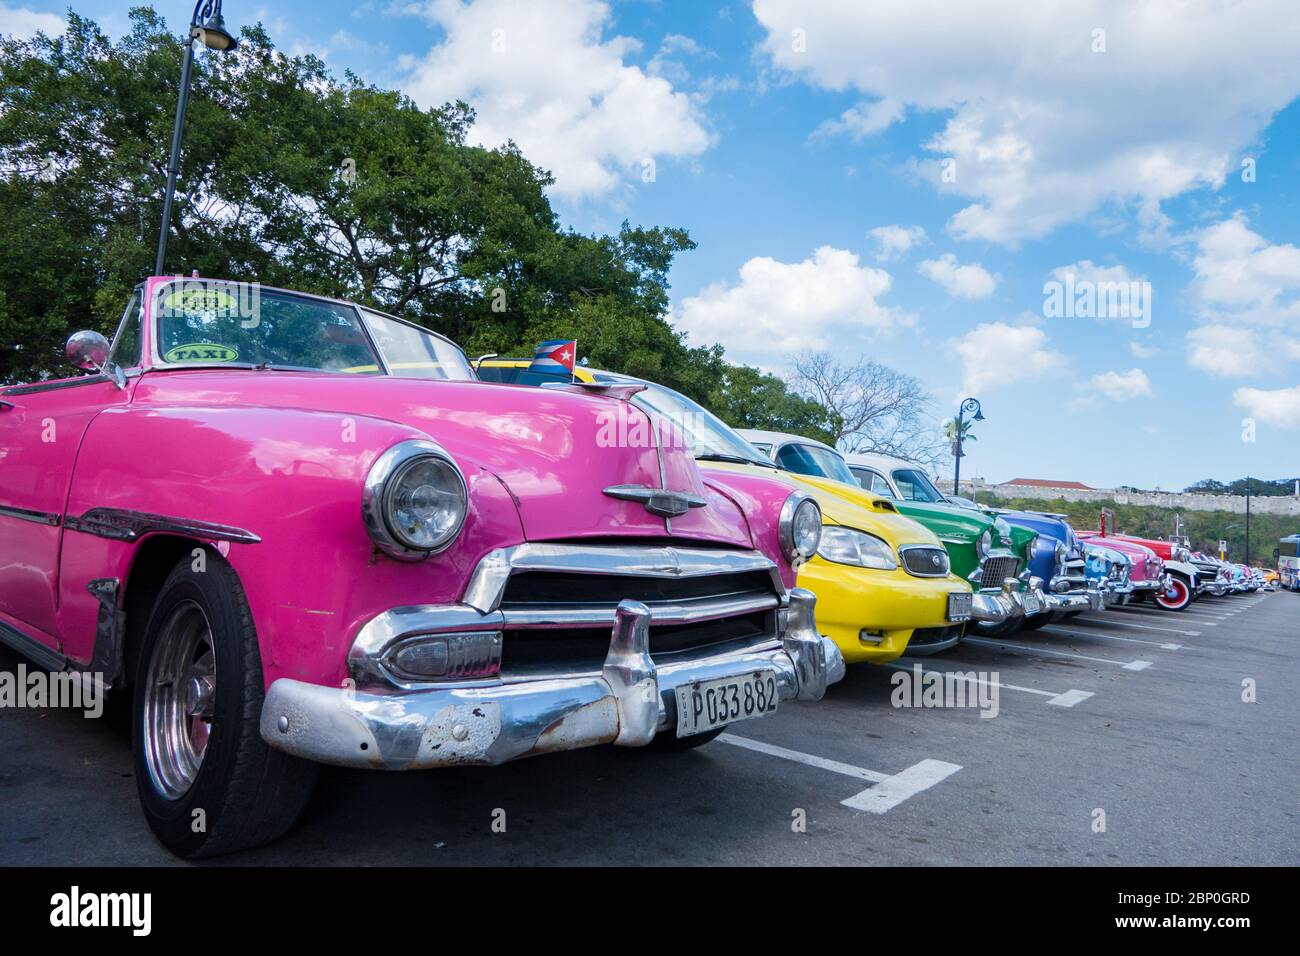 Row of classic Cuban cars of varying colors Stock Photo